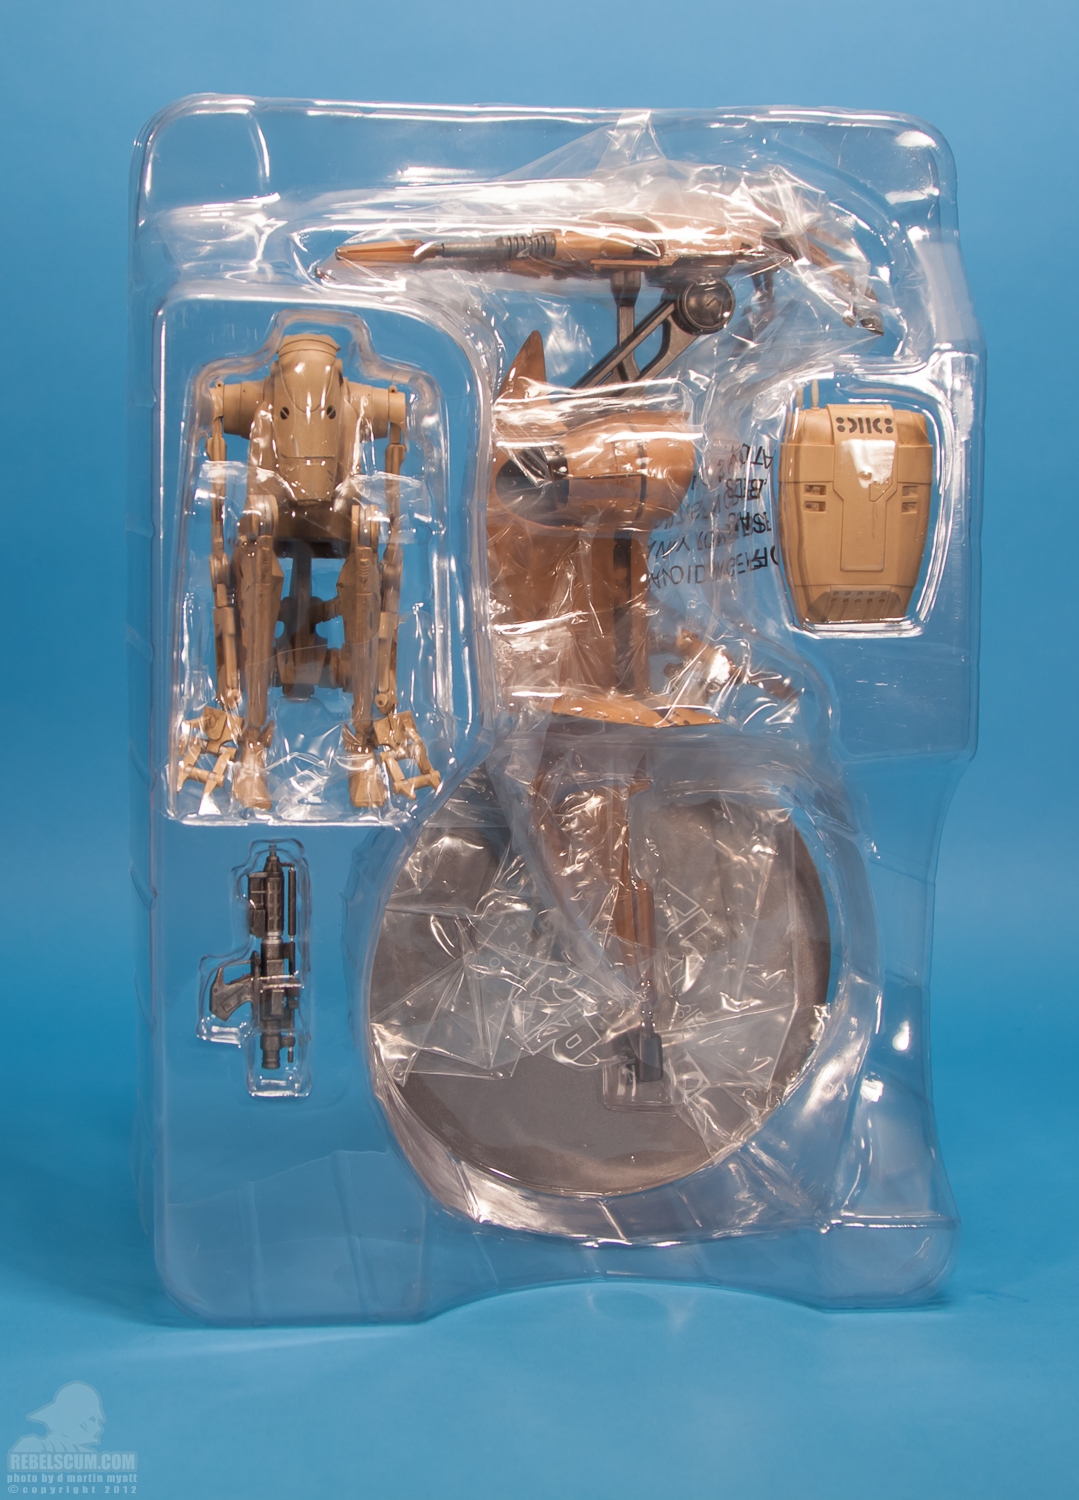 STAP_Battle_Droid_Star_Wars_Sideshow_Collectibles-47.jpg